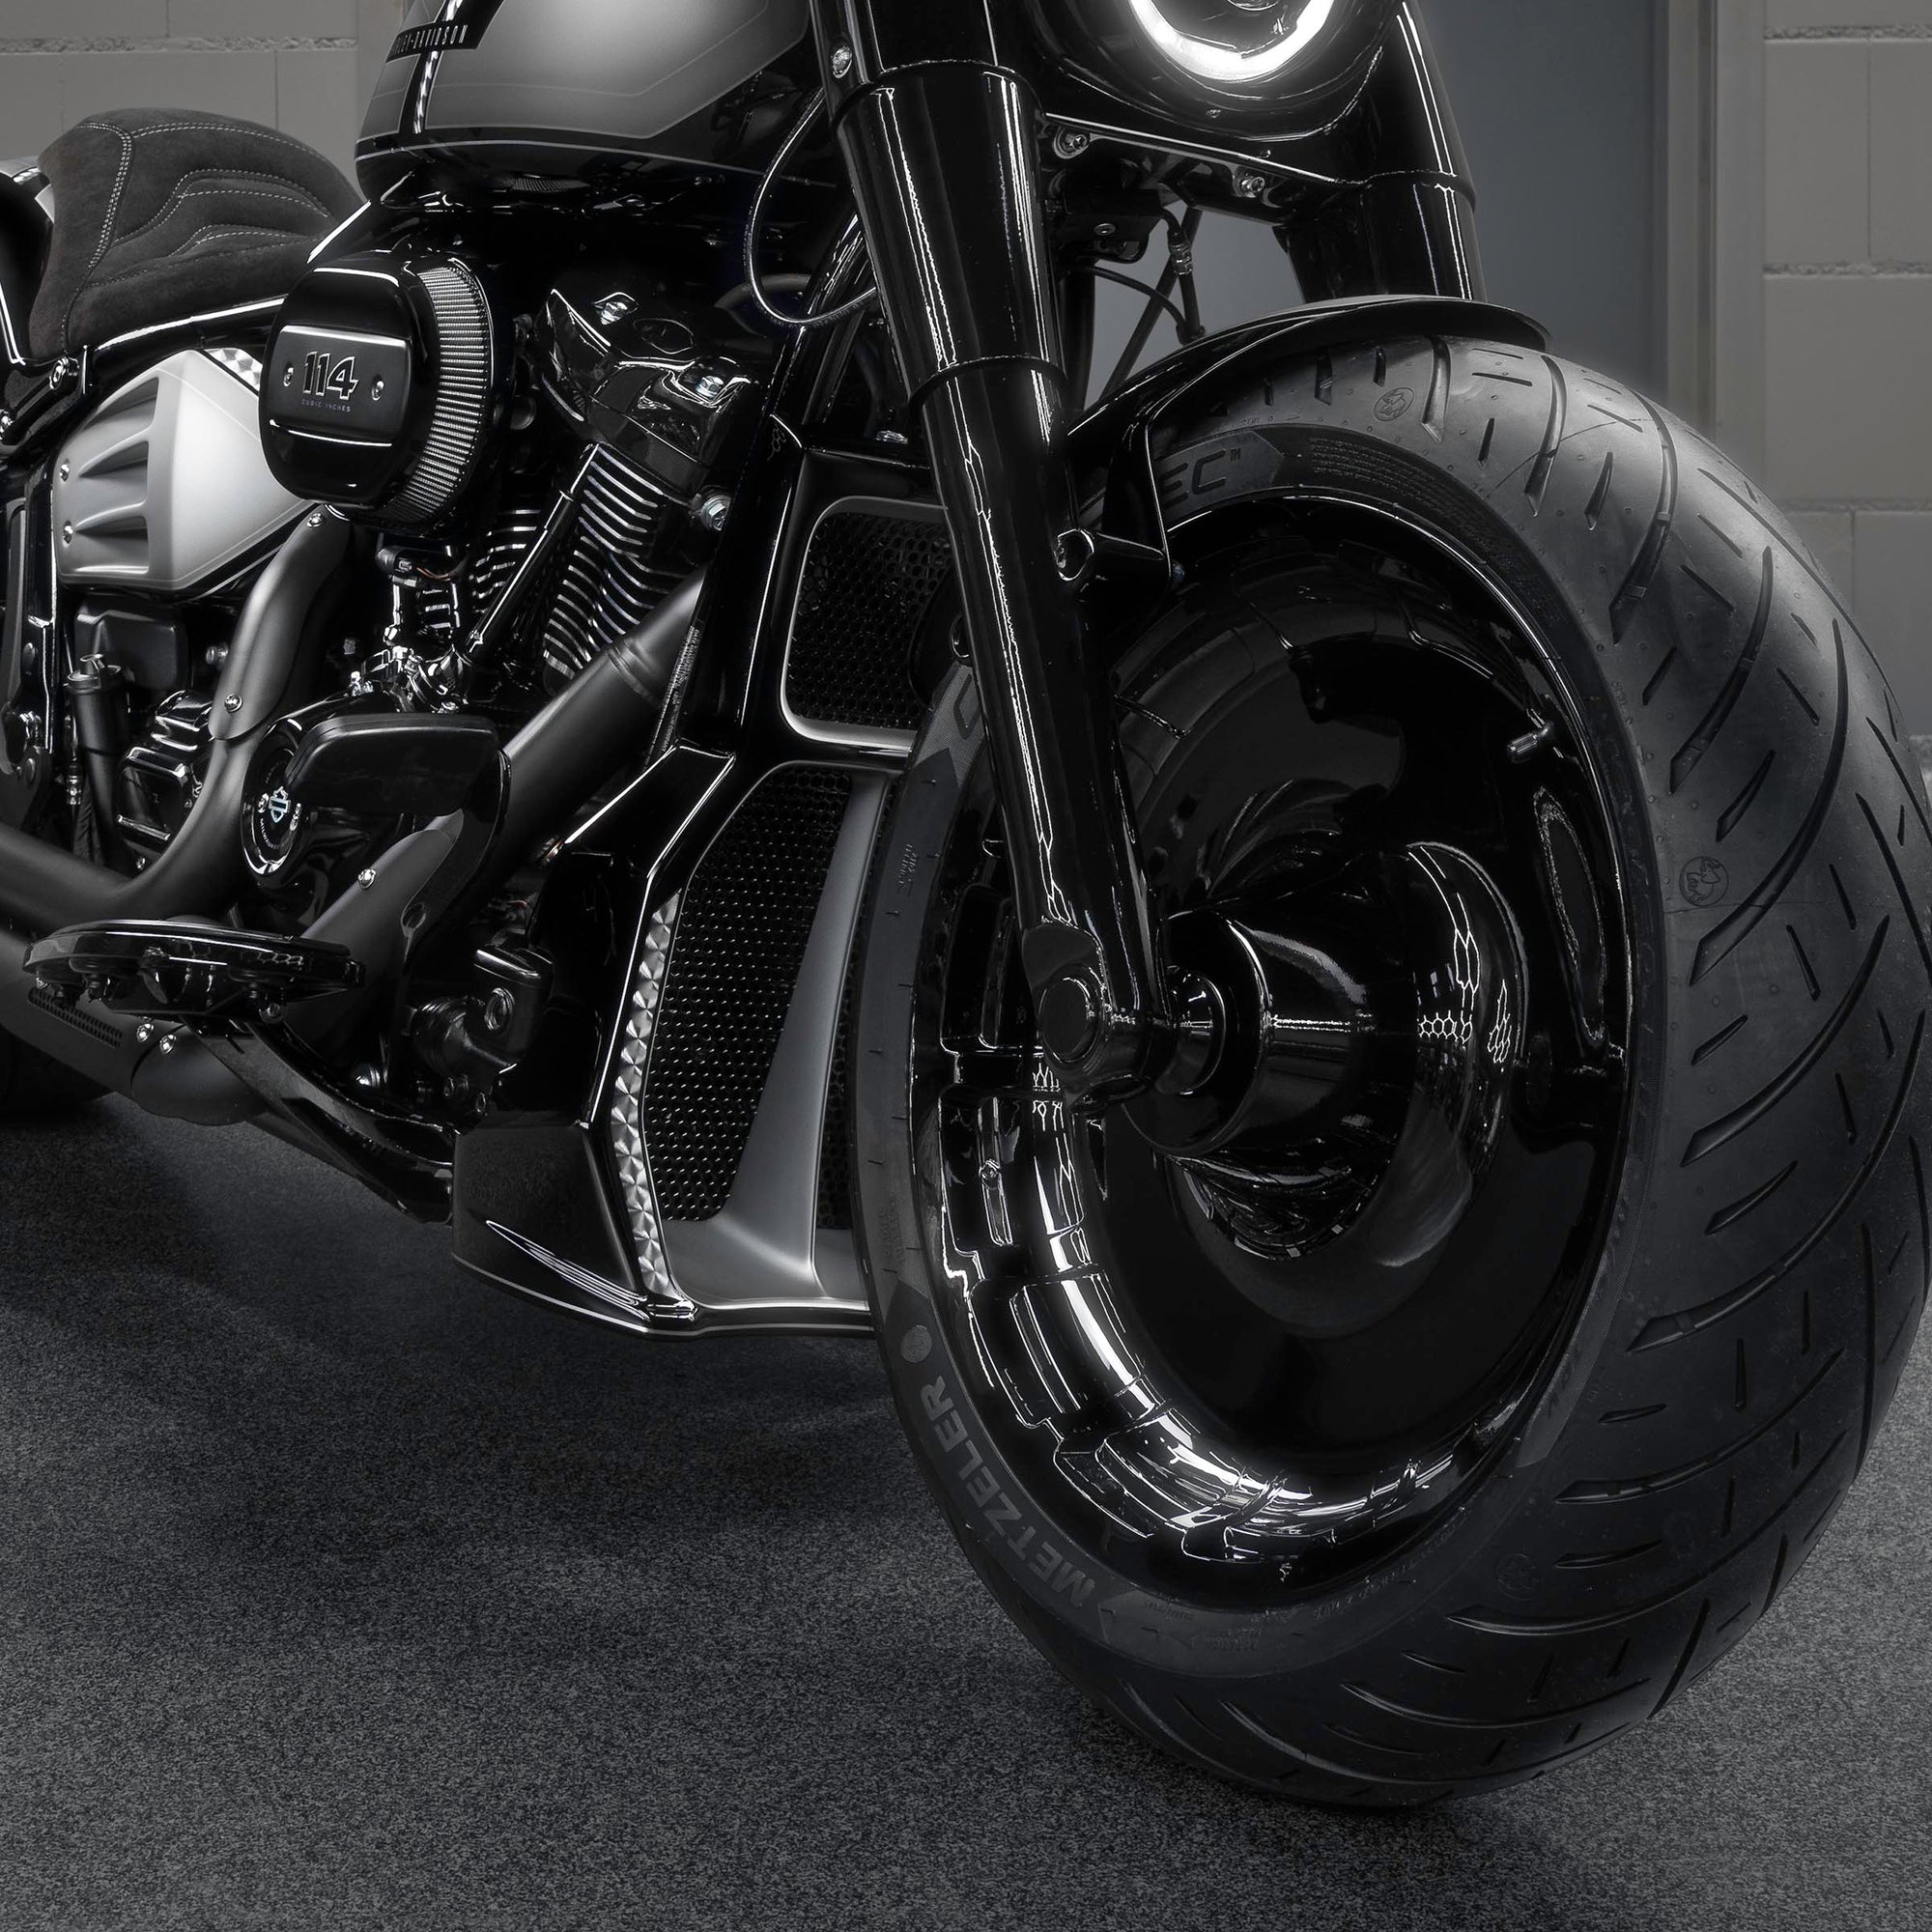 Zoomed Harley Davidson Softail Fat Boy motorcycle with Killer Custom parts from the front in a modern bike shop